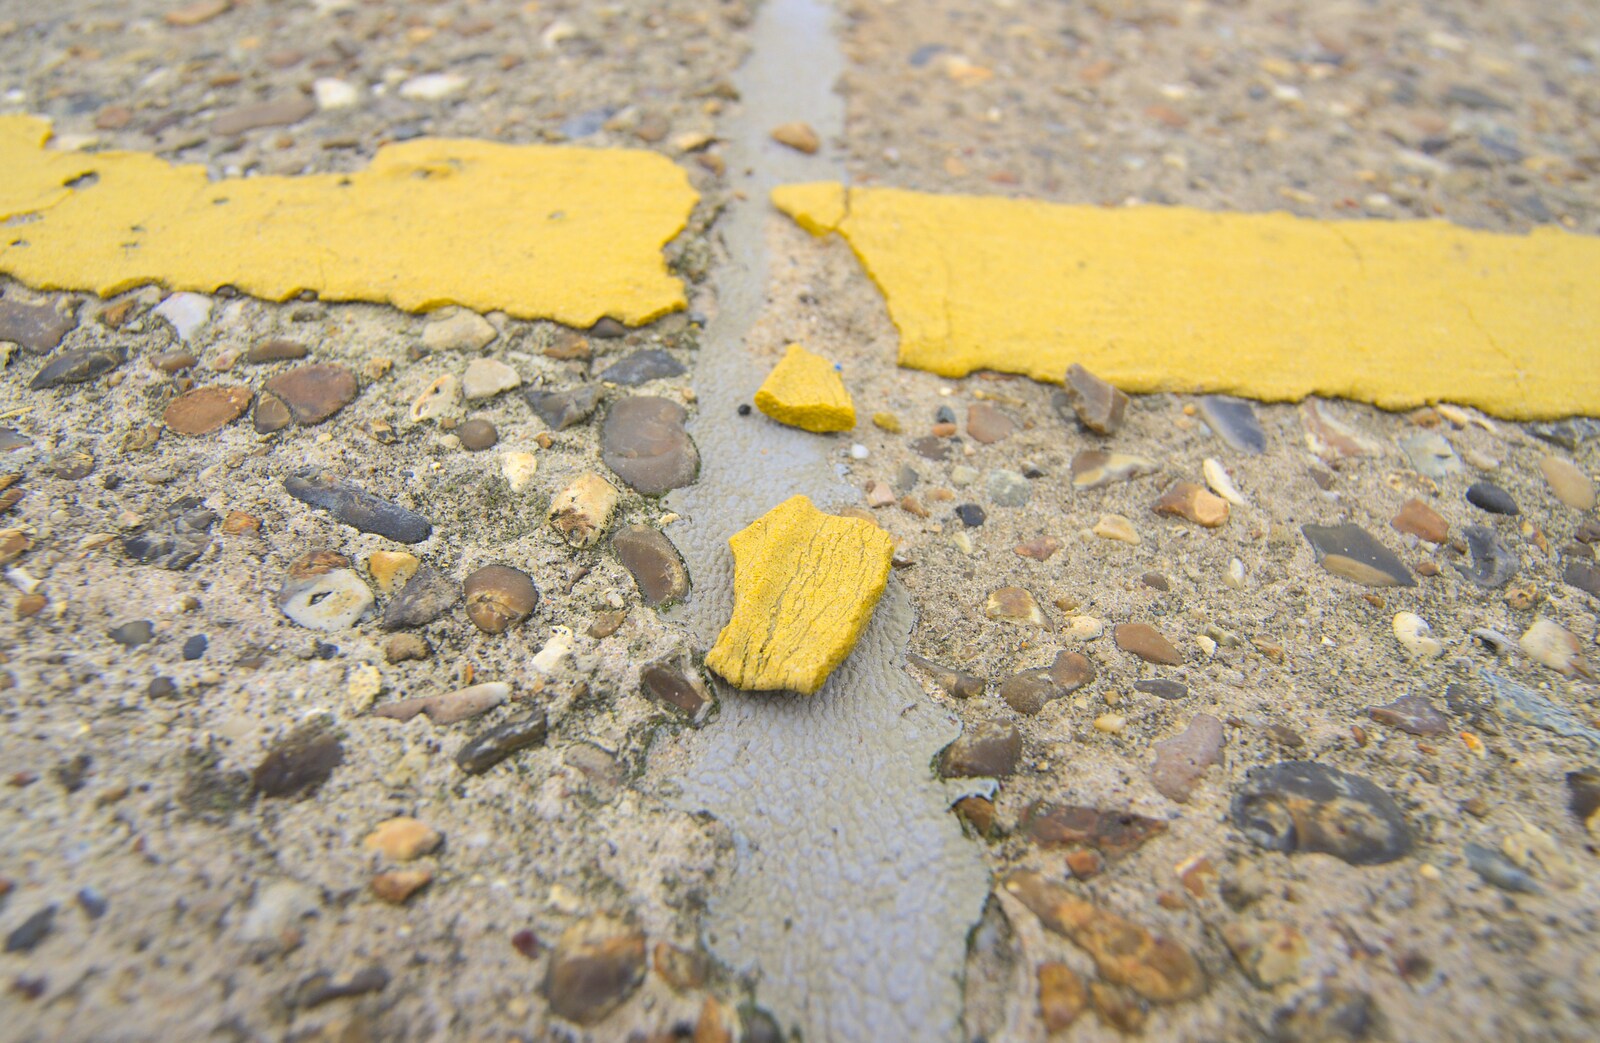 Broken yellow lines from A Boxing Day Walk, and a Trip to the Beach, Thornham and Southwold, Suffolk - 26th December 2011